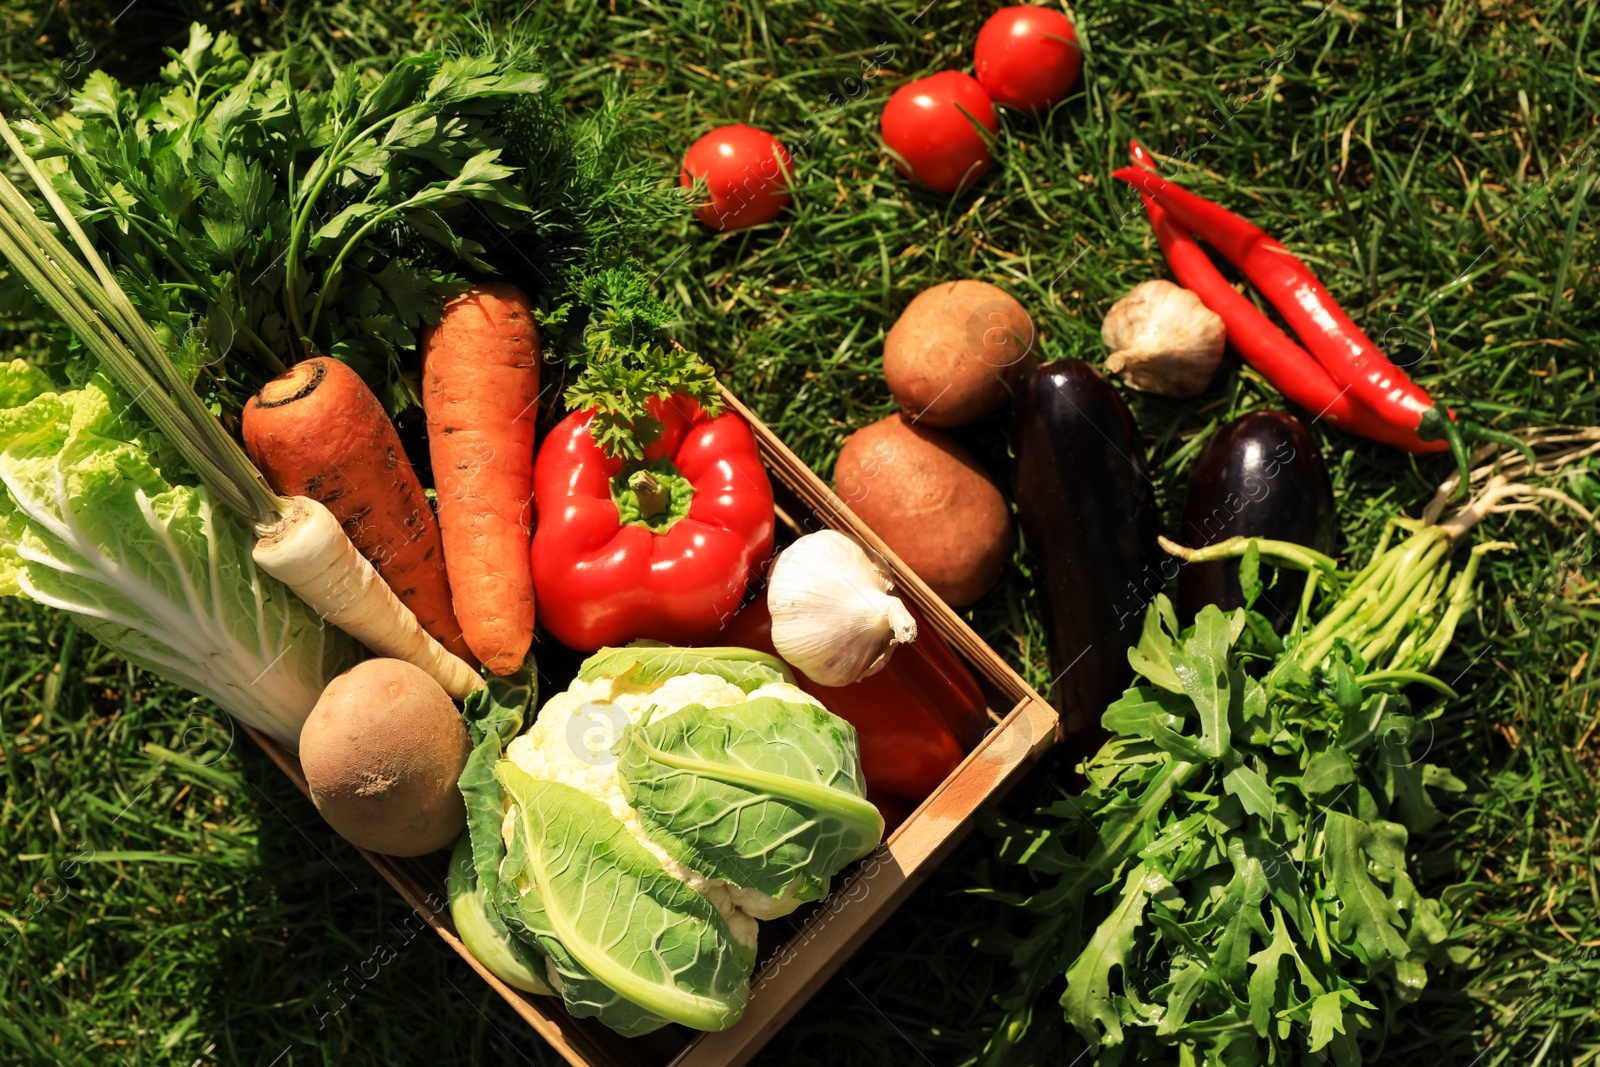 Photo of Different fresh ripe vegetables on green grass, flat lay